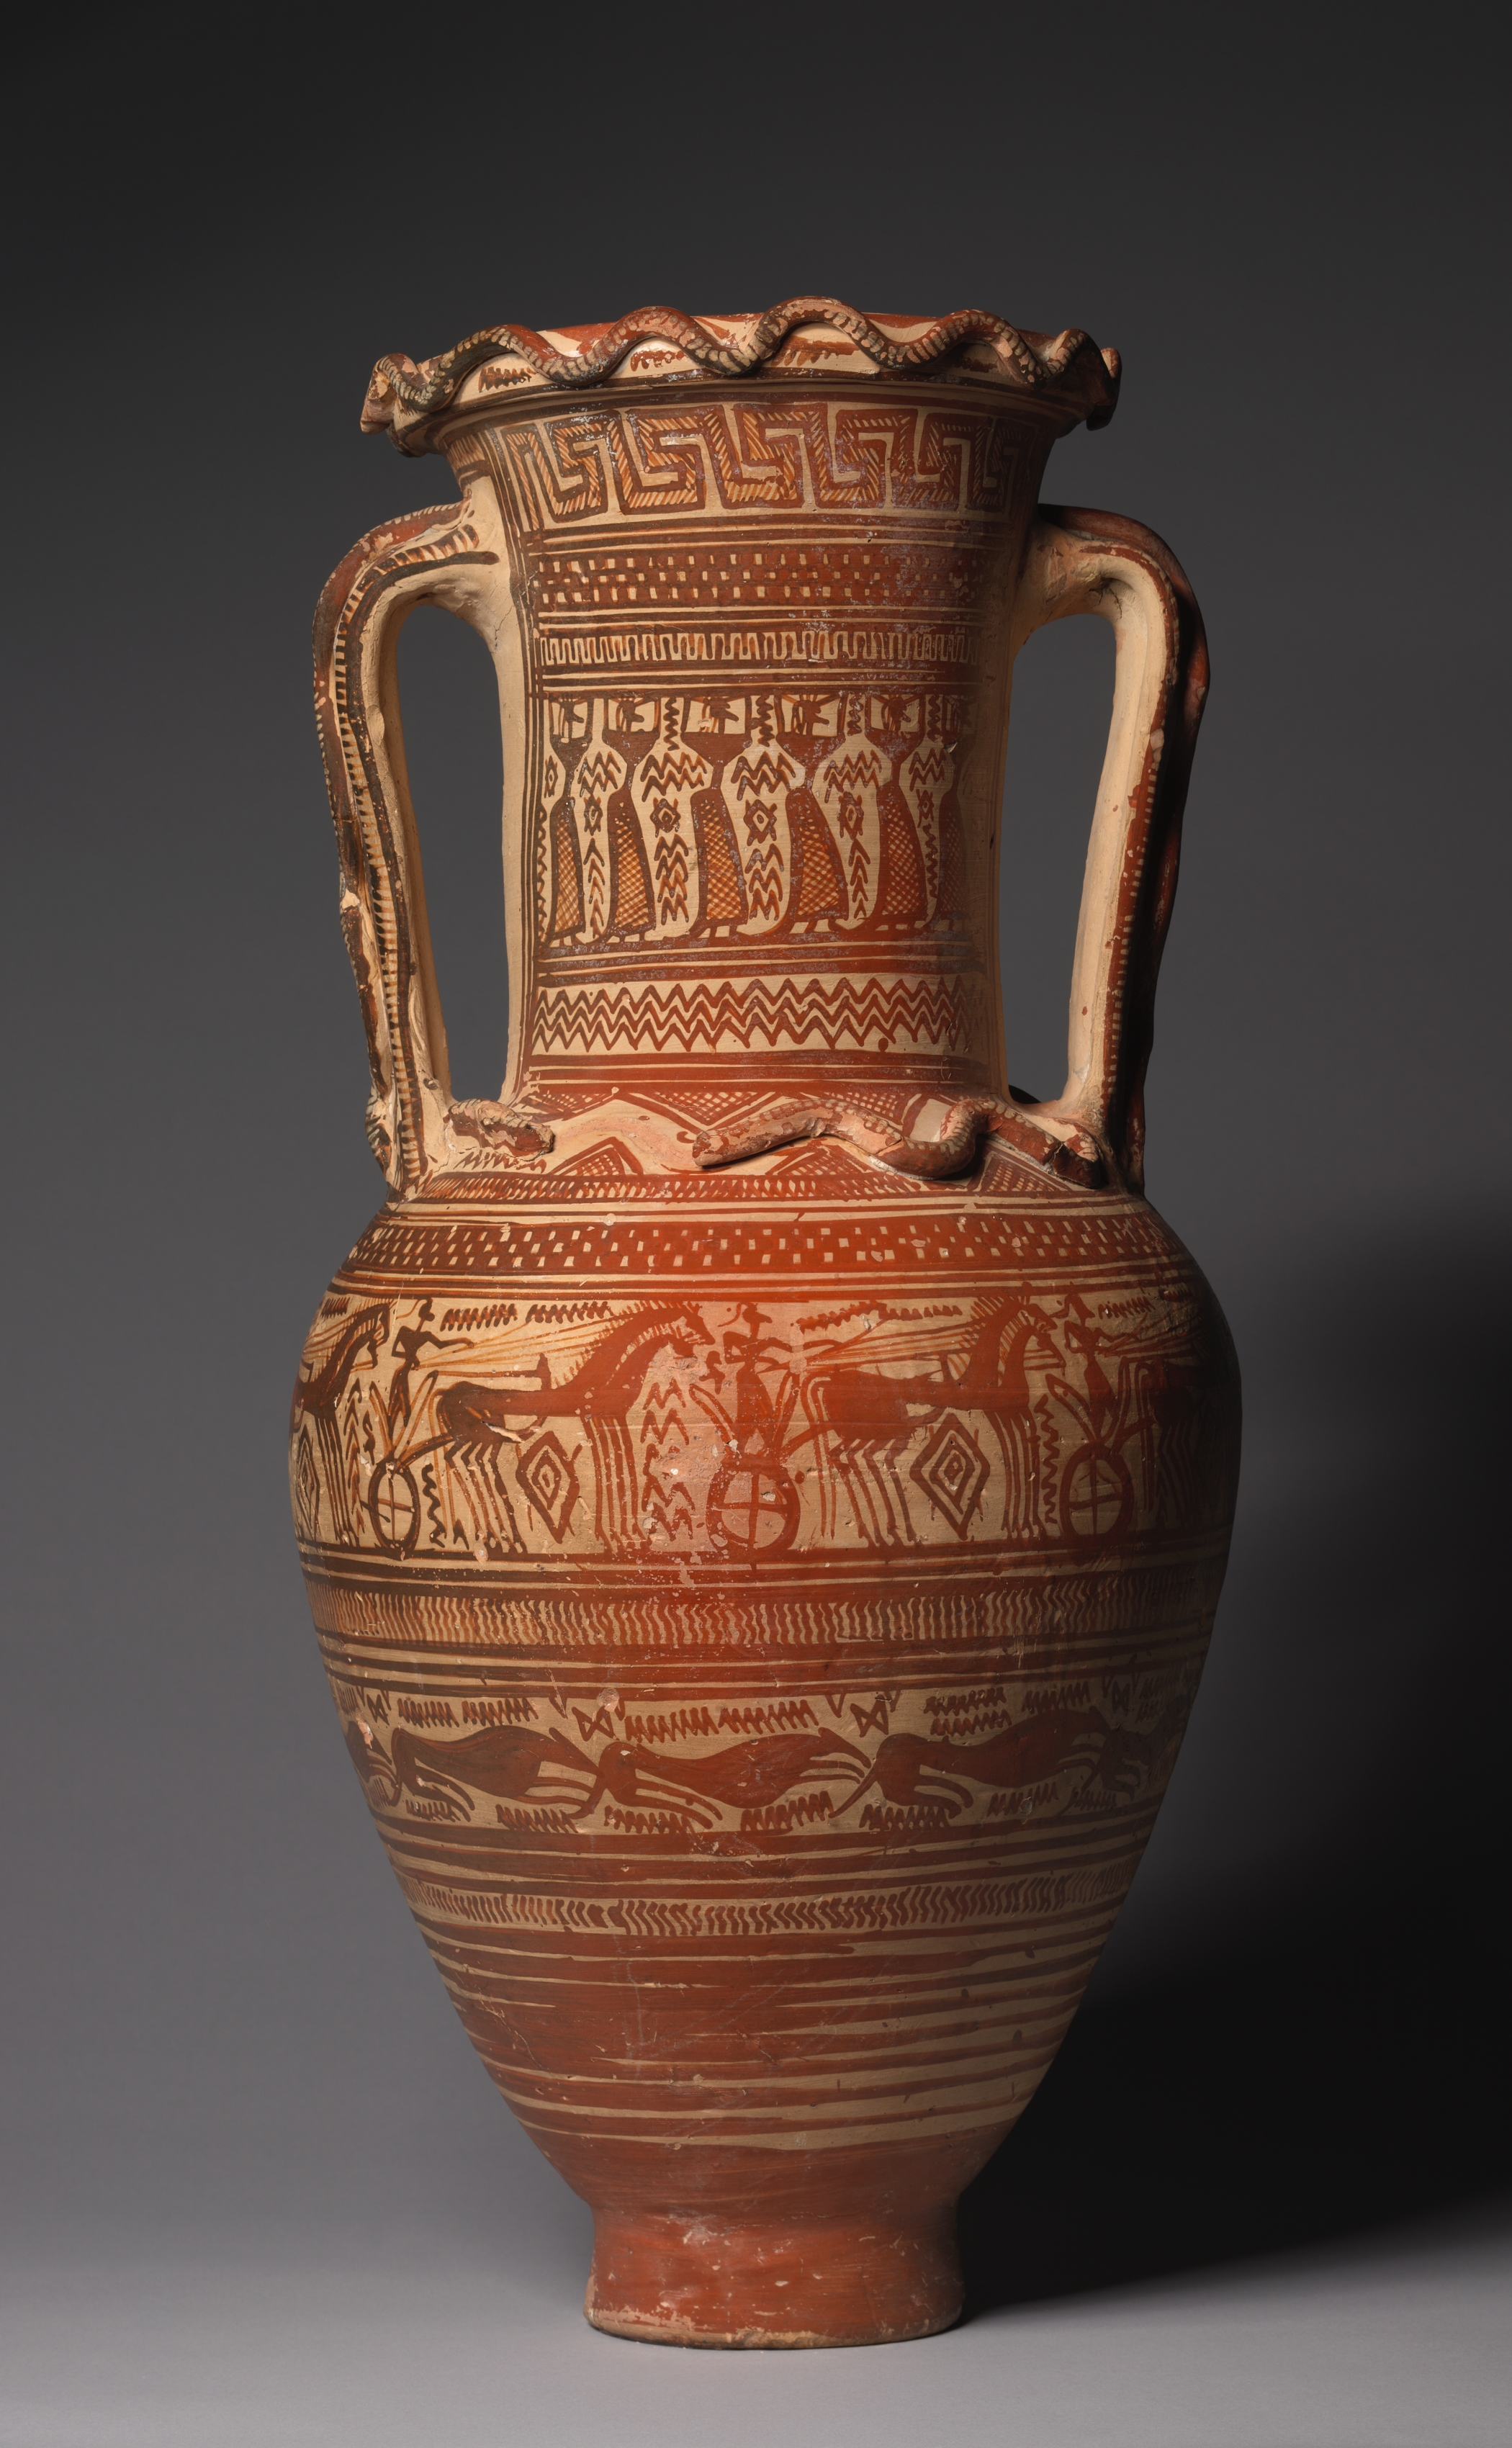 Geometric Neck-Handled Amphora (Storage Vessel): Prothesis (Laying out of Corpse), Mourners, Chariots